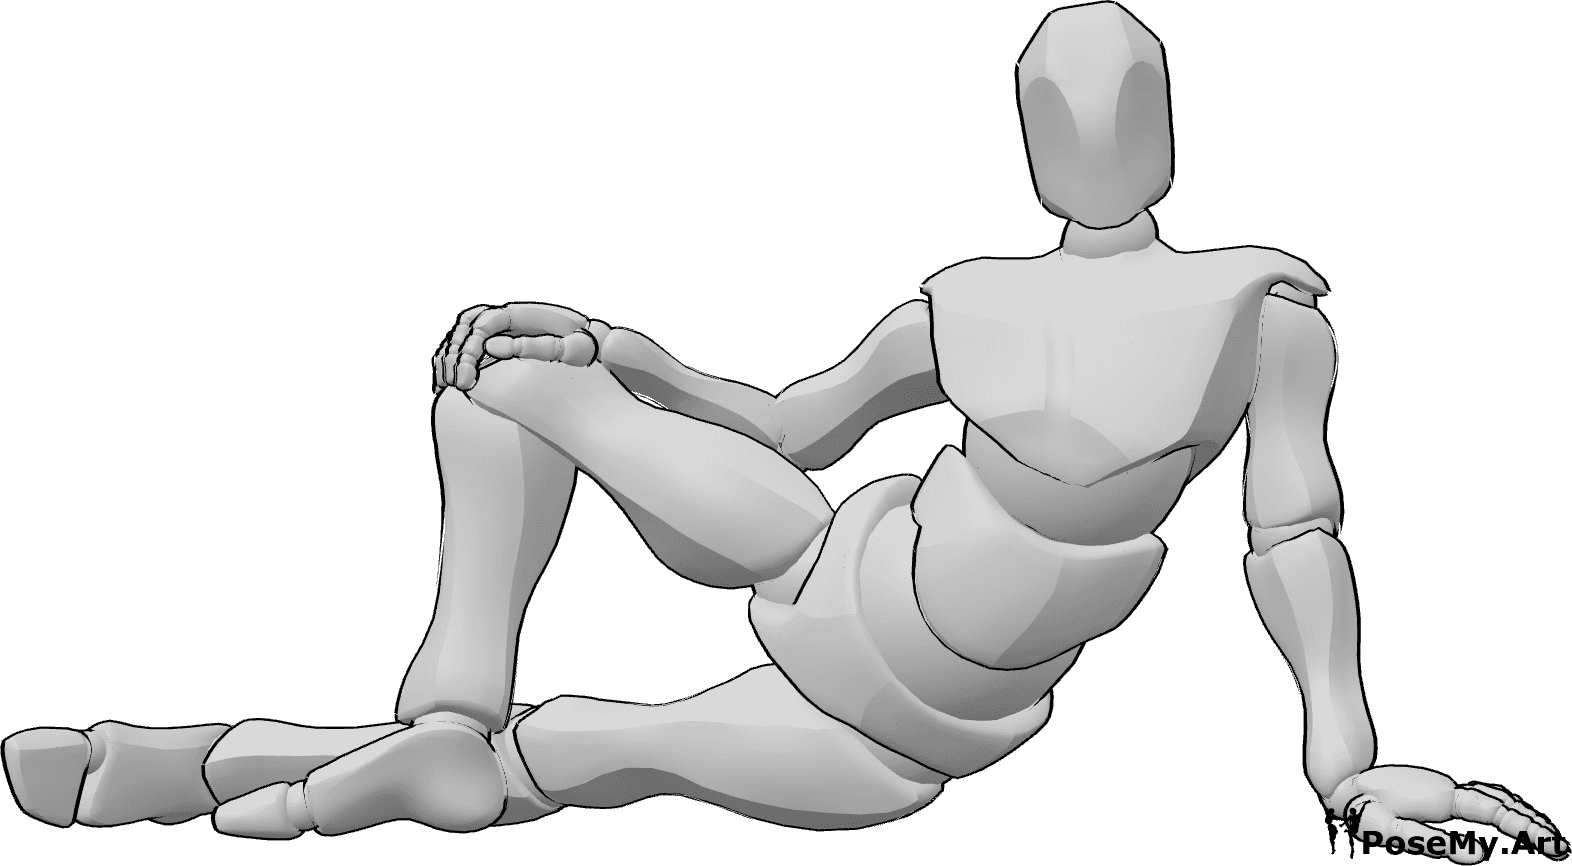 Pose Reference - Male lying model pose - Male model is lying and posing